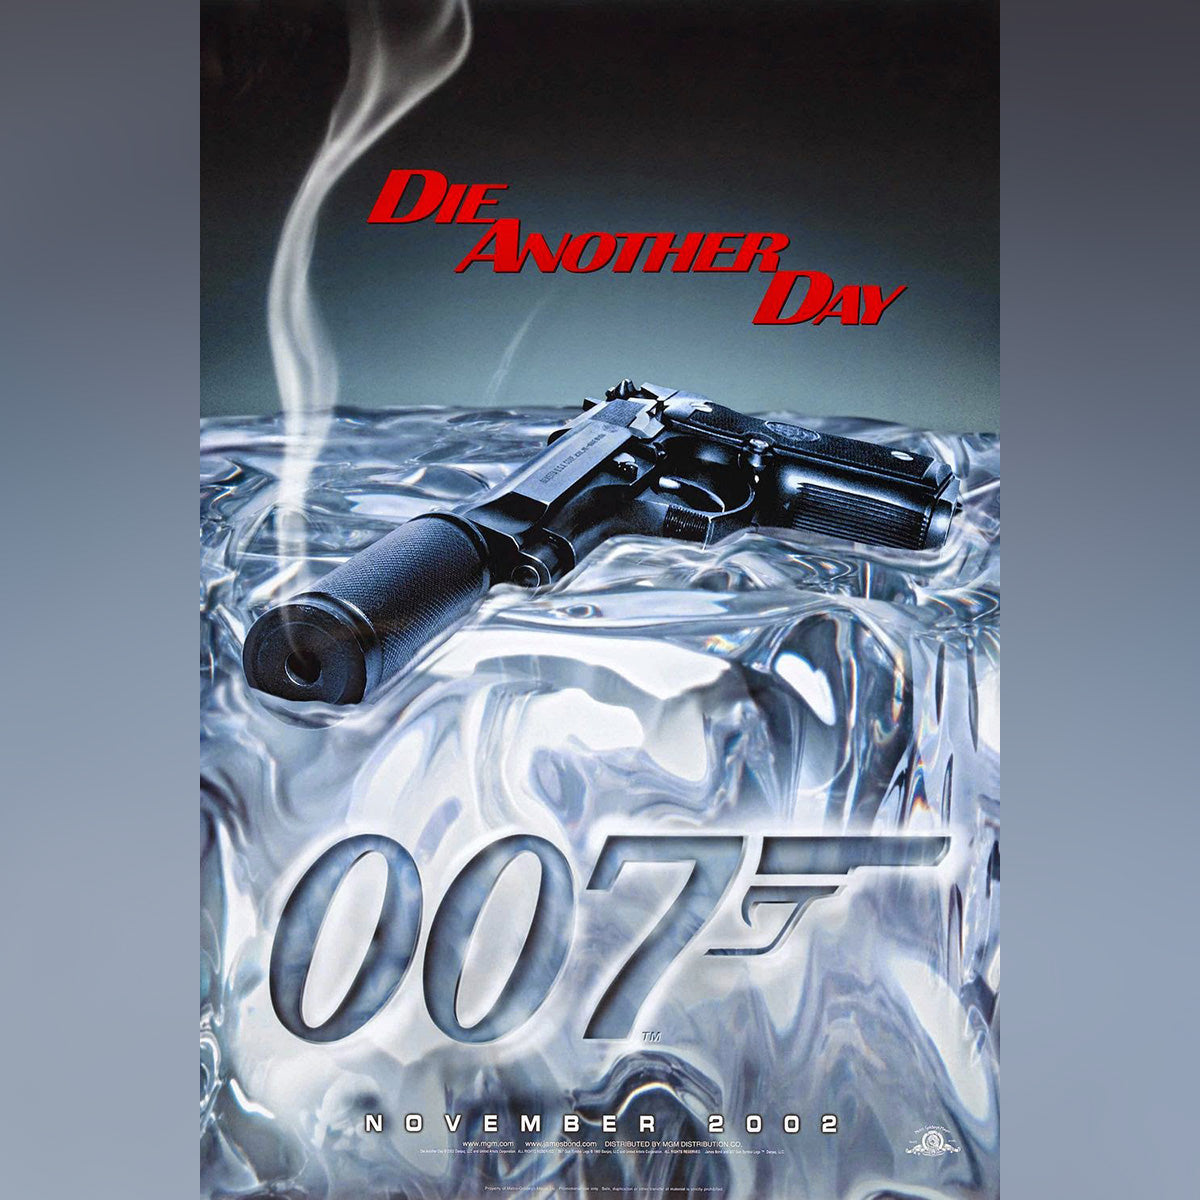 Original Movie Poster of Die Another Day (2002)